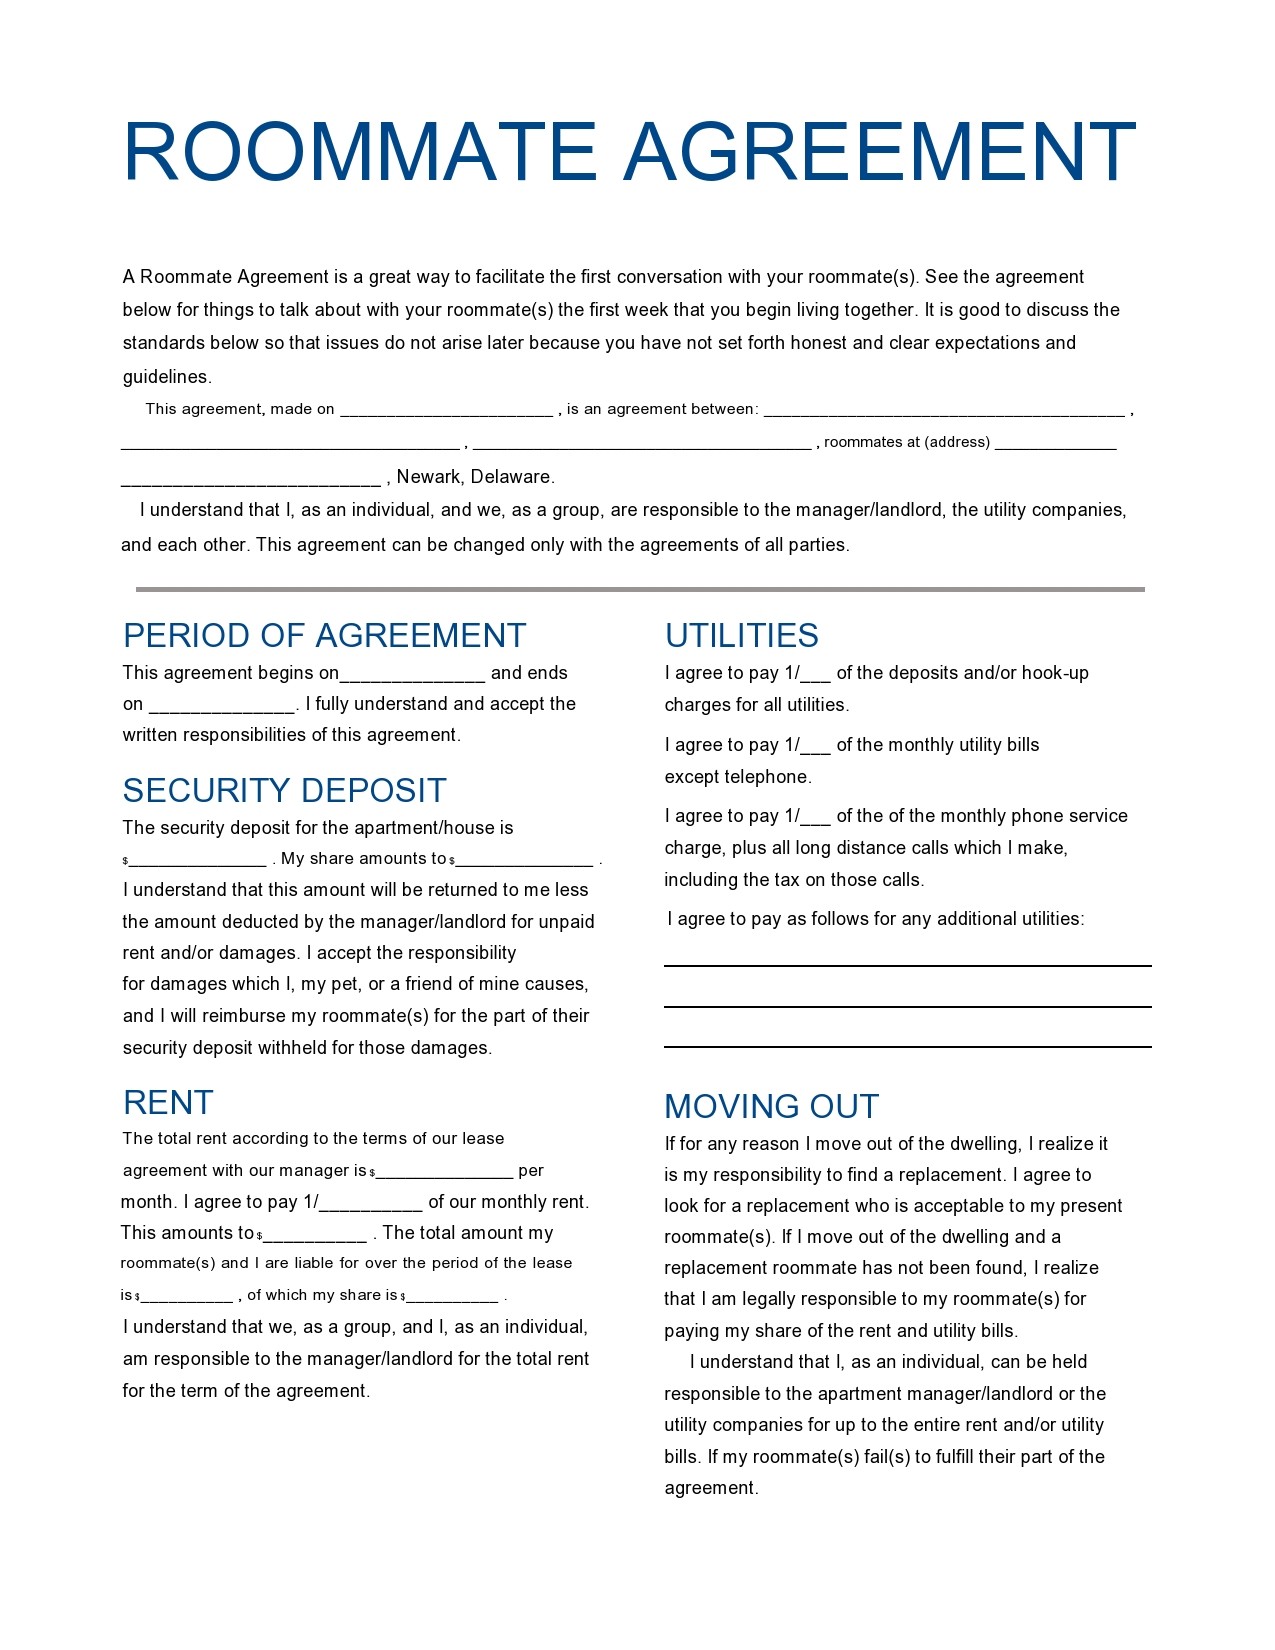 Free roommate agreement template 14